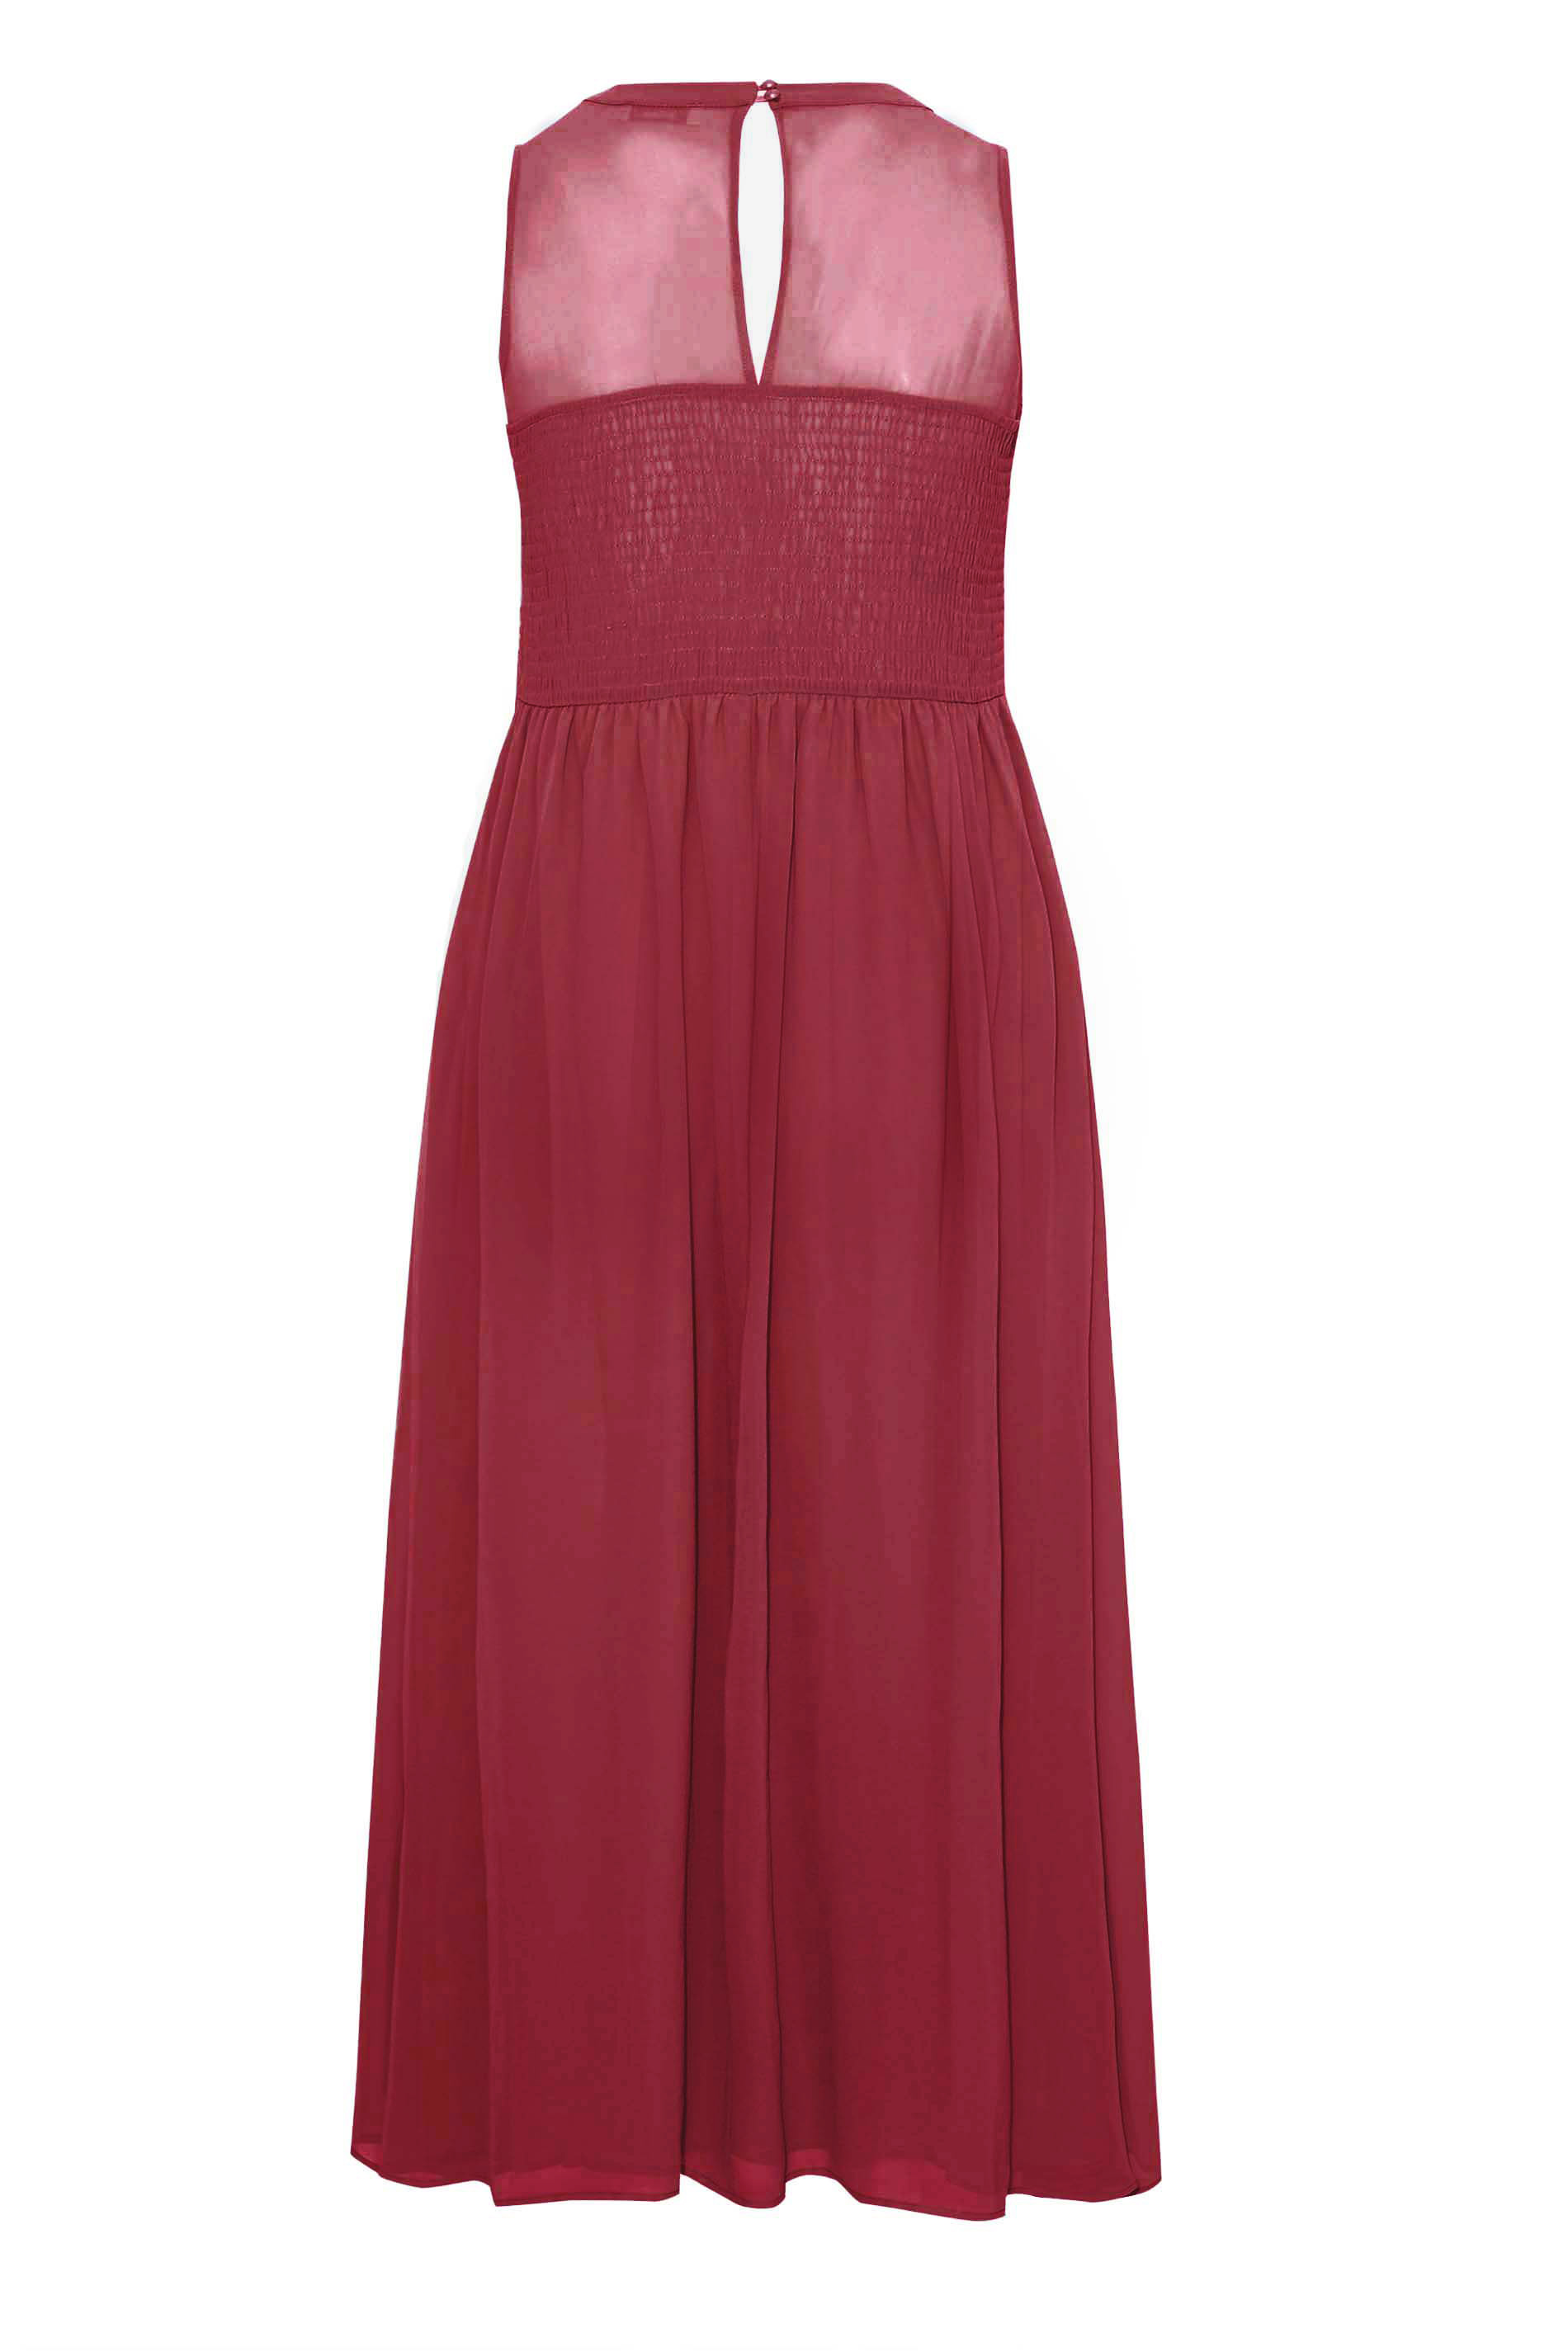 Plus Size YOURS LONDON Curve Burgundy Red Lace Pleated Maxi Dress